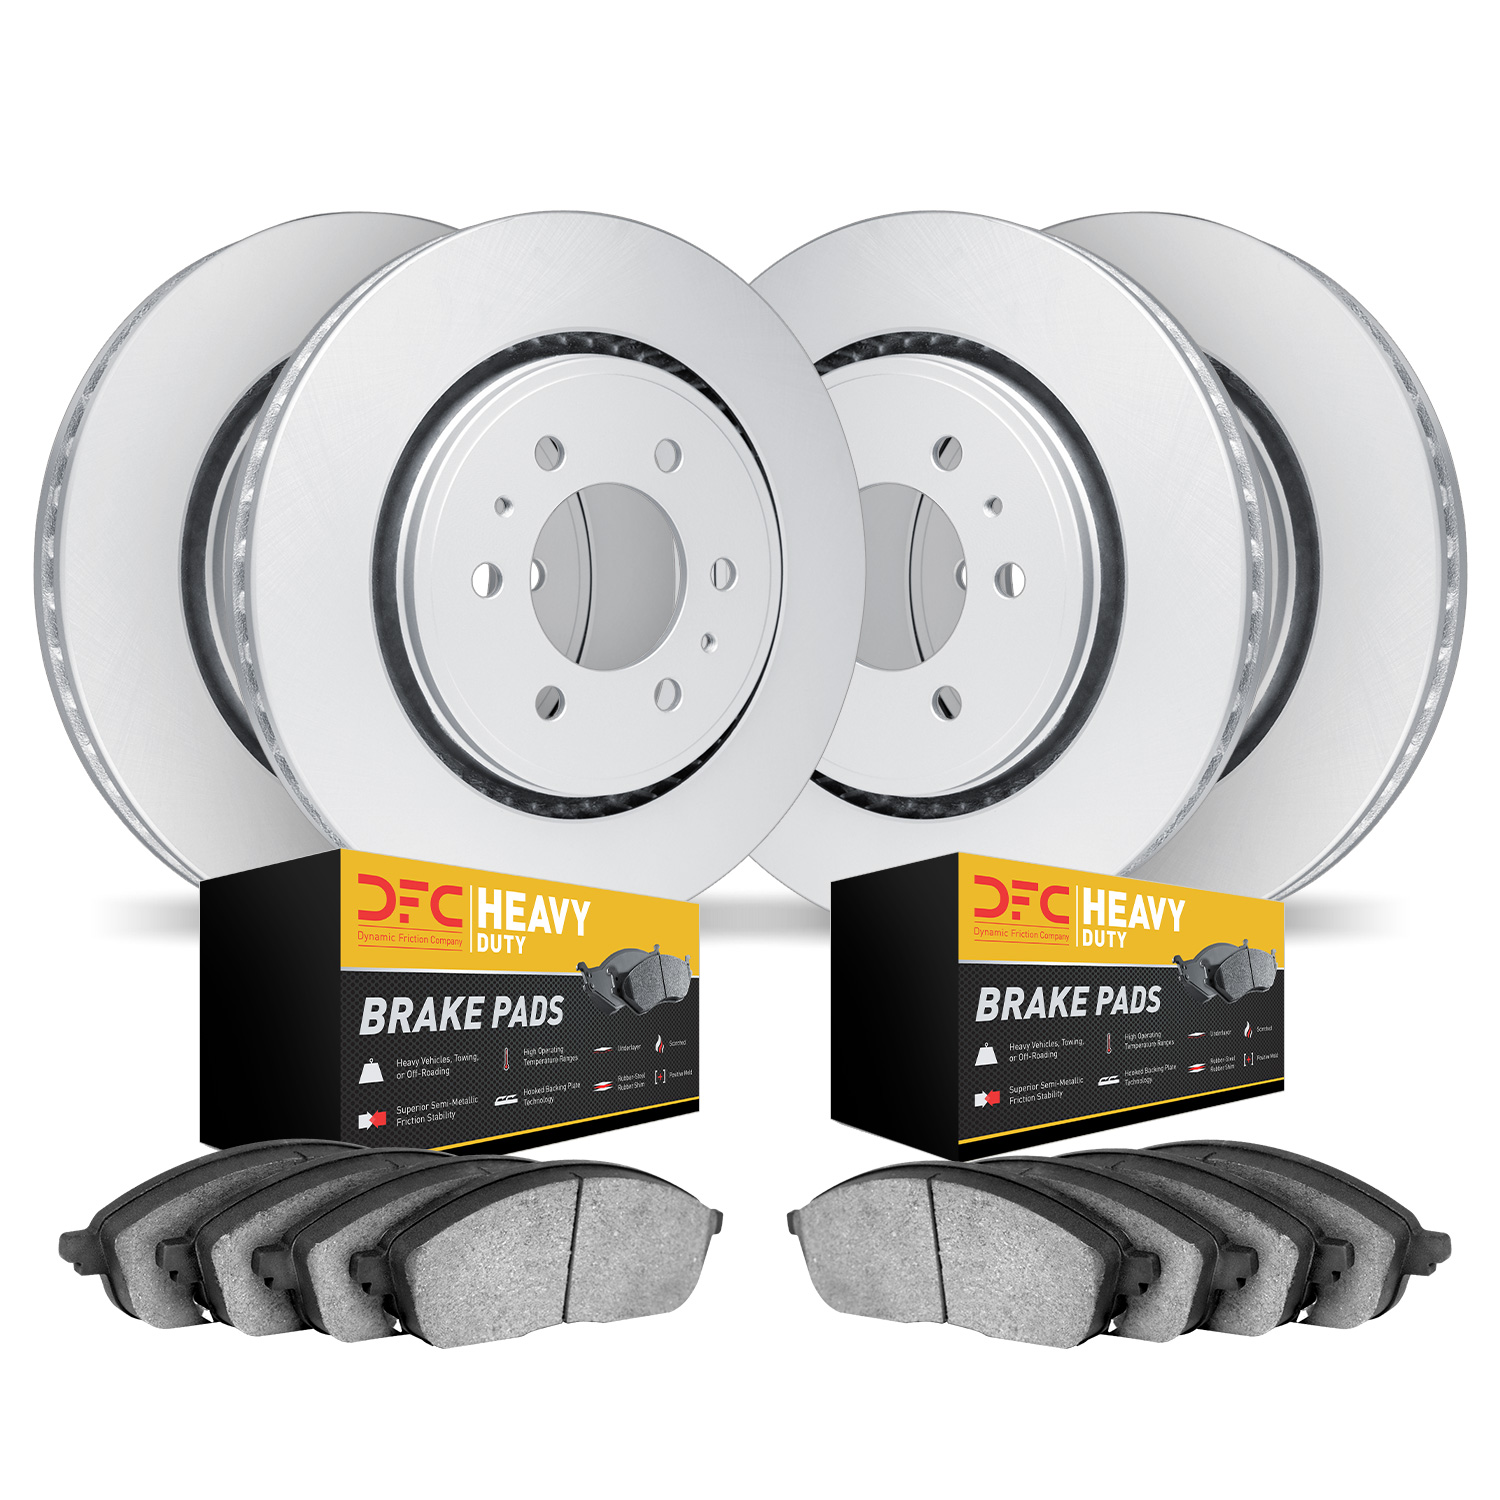 4204-54038 Geospec Brake Rotors w/Heavy-Duty Brake Pads Kit, 2004-2008 Ford/Lincoln/Mercury/Mazda, Position: Front and Rear